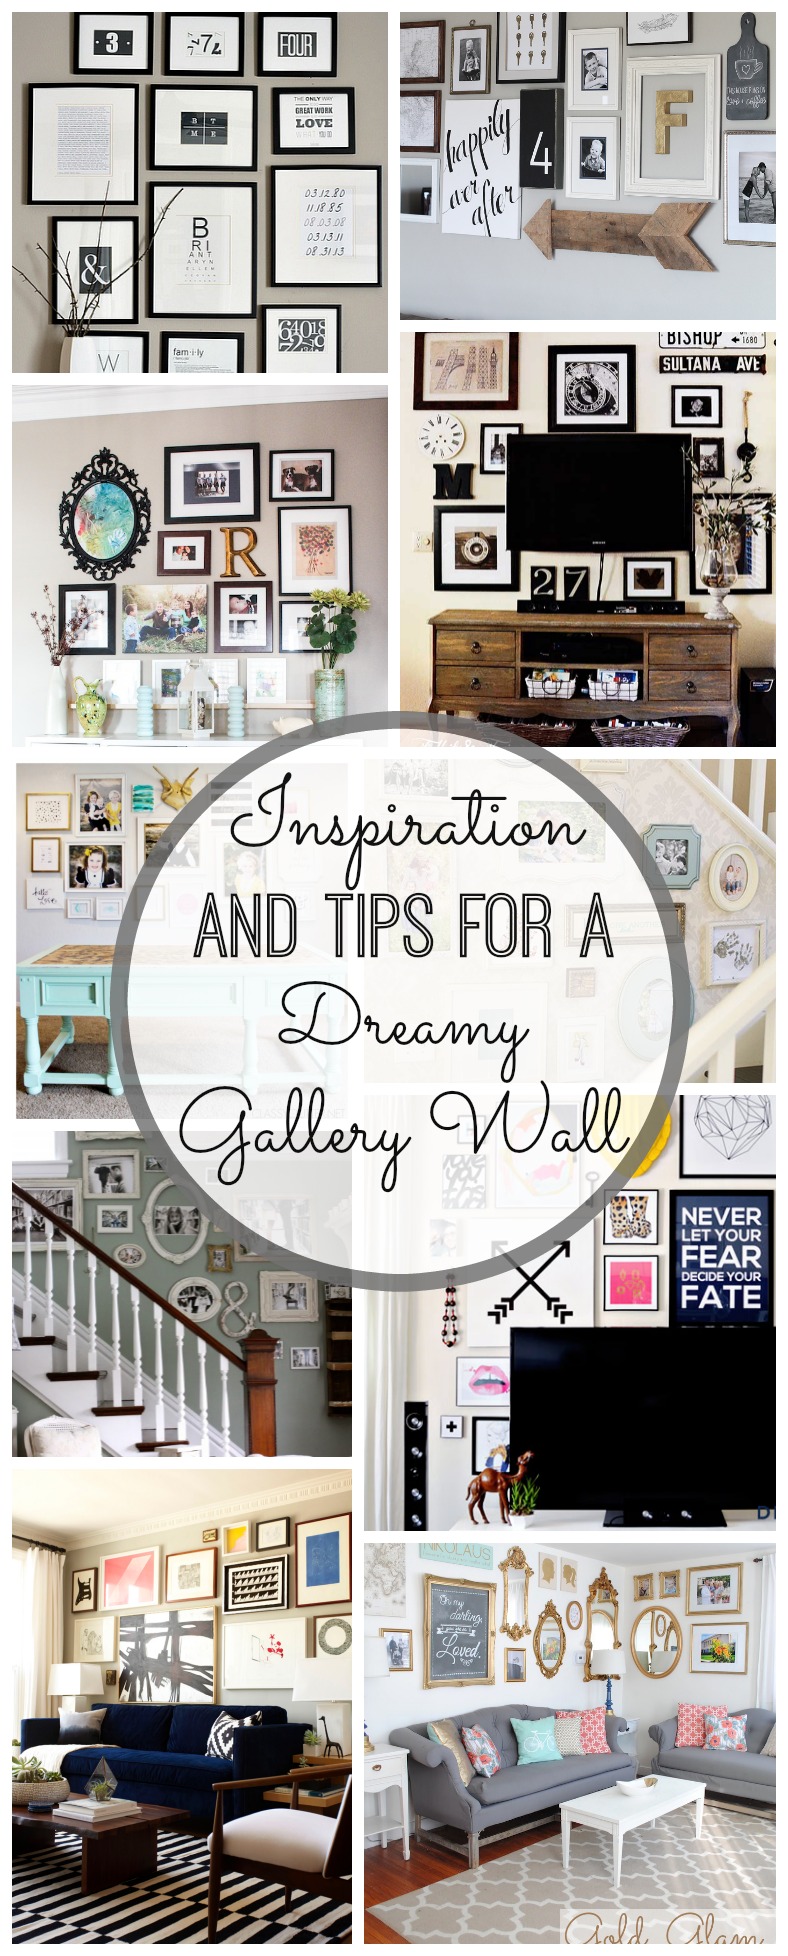 Gallery Wall Inspiration and Tips